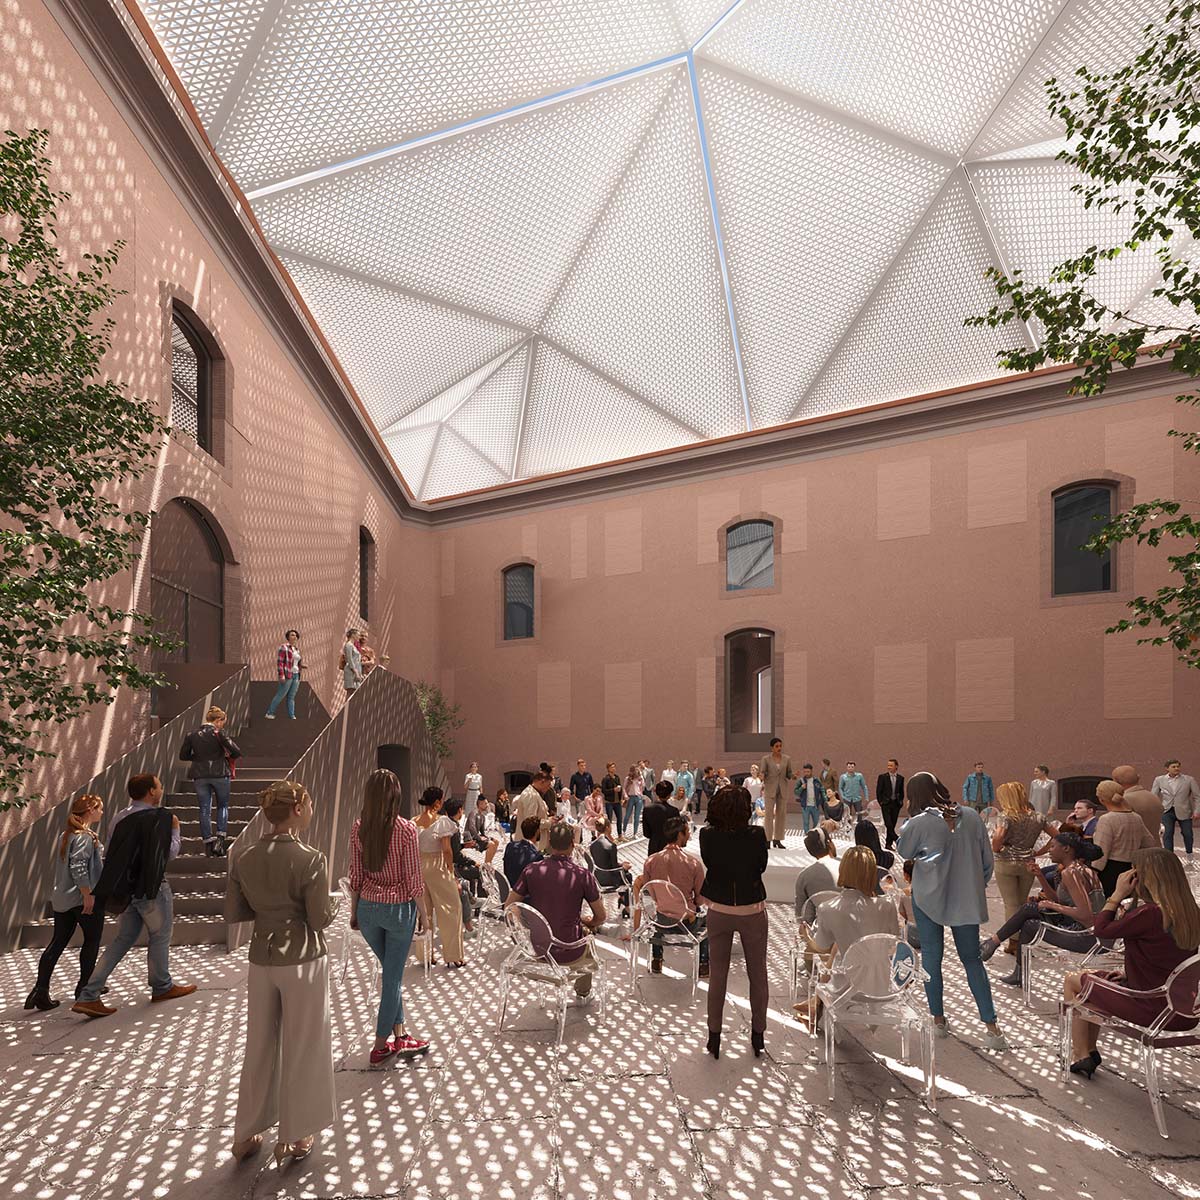 CRA and Italo Rota turn an 18th-century hospital complex into a cultural hub with kinetic roof